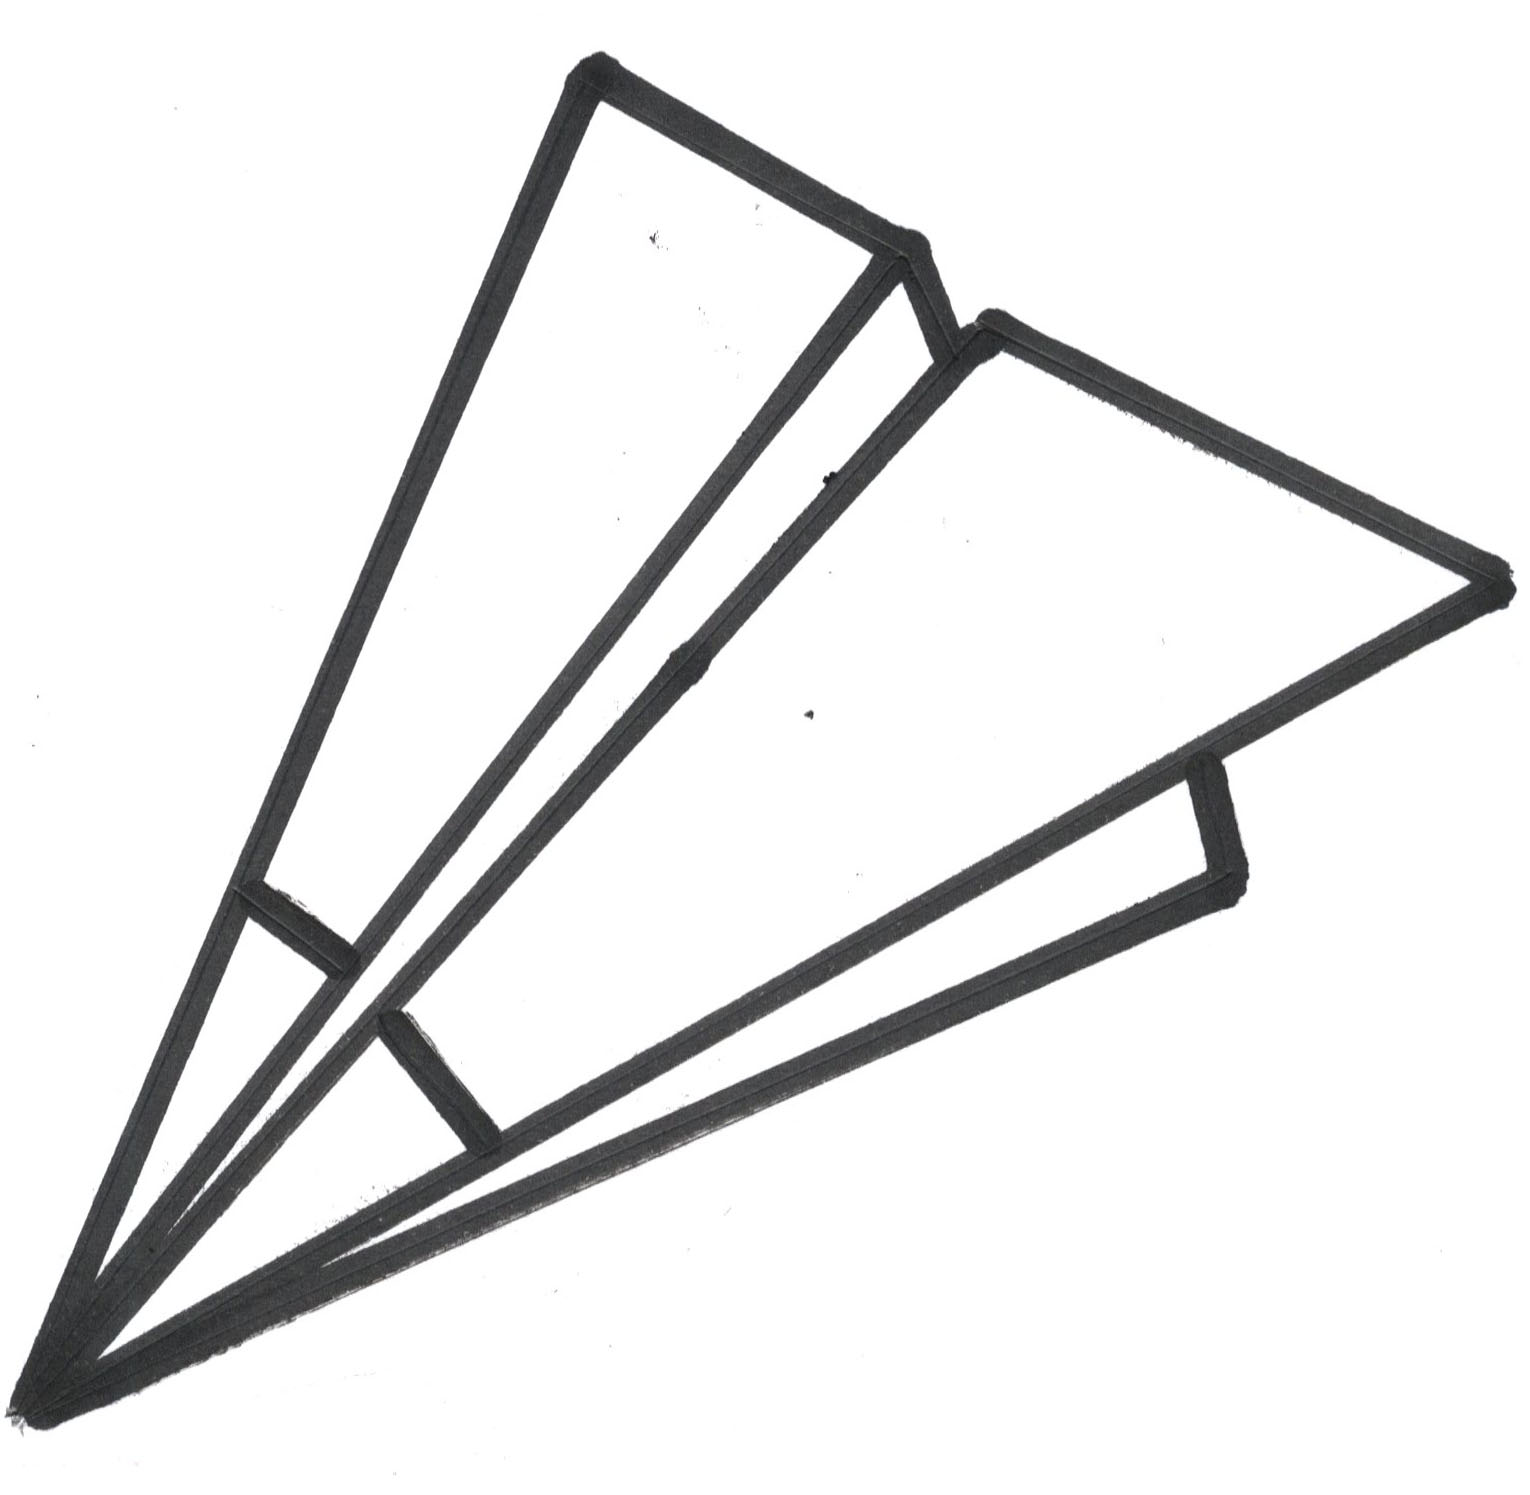 Flying Paper Airplane Clipart